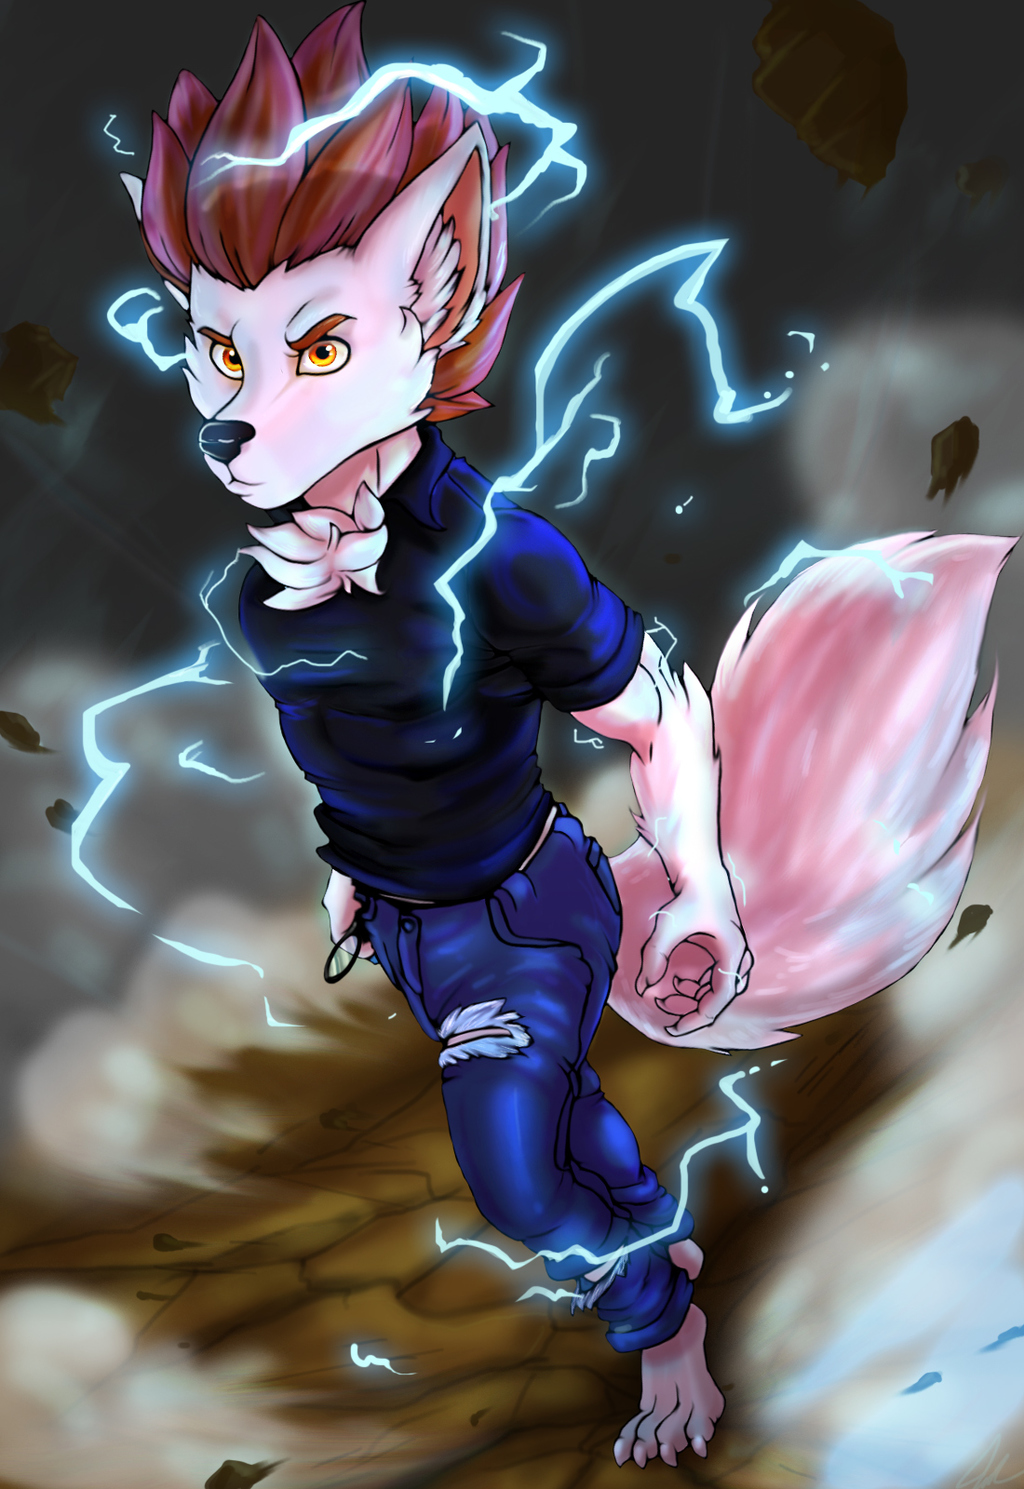 Fully Charged! (COMMISSION ART)